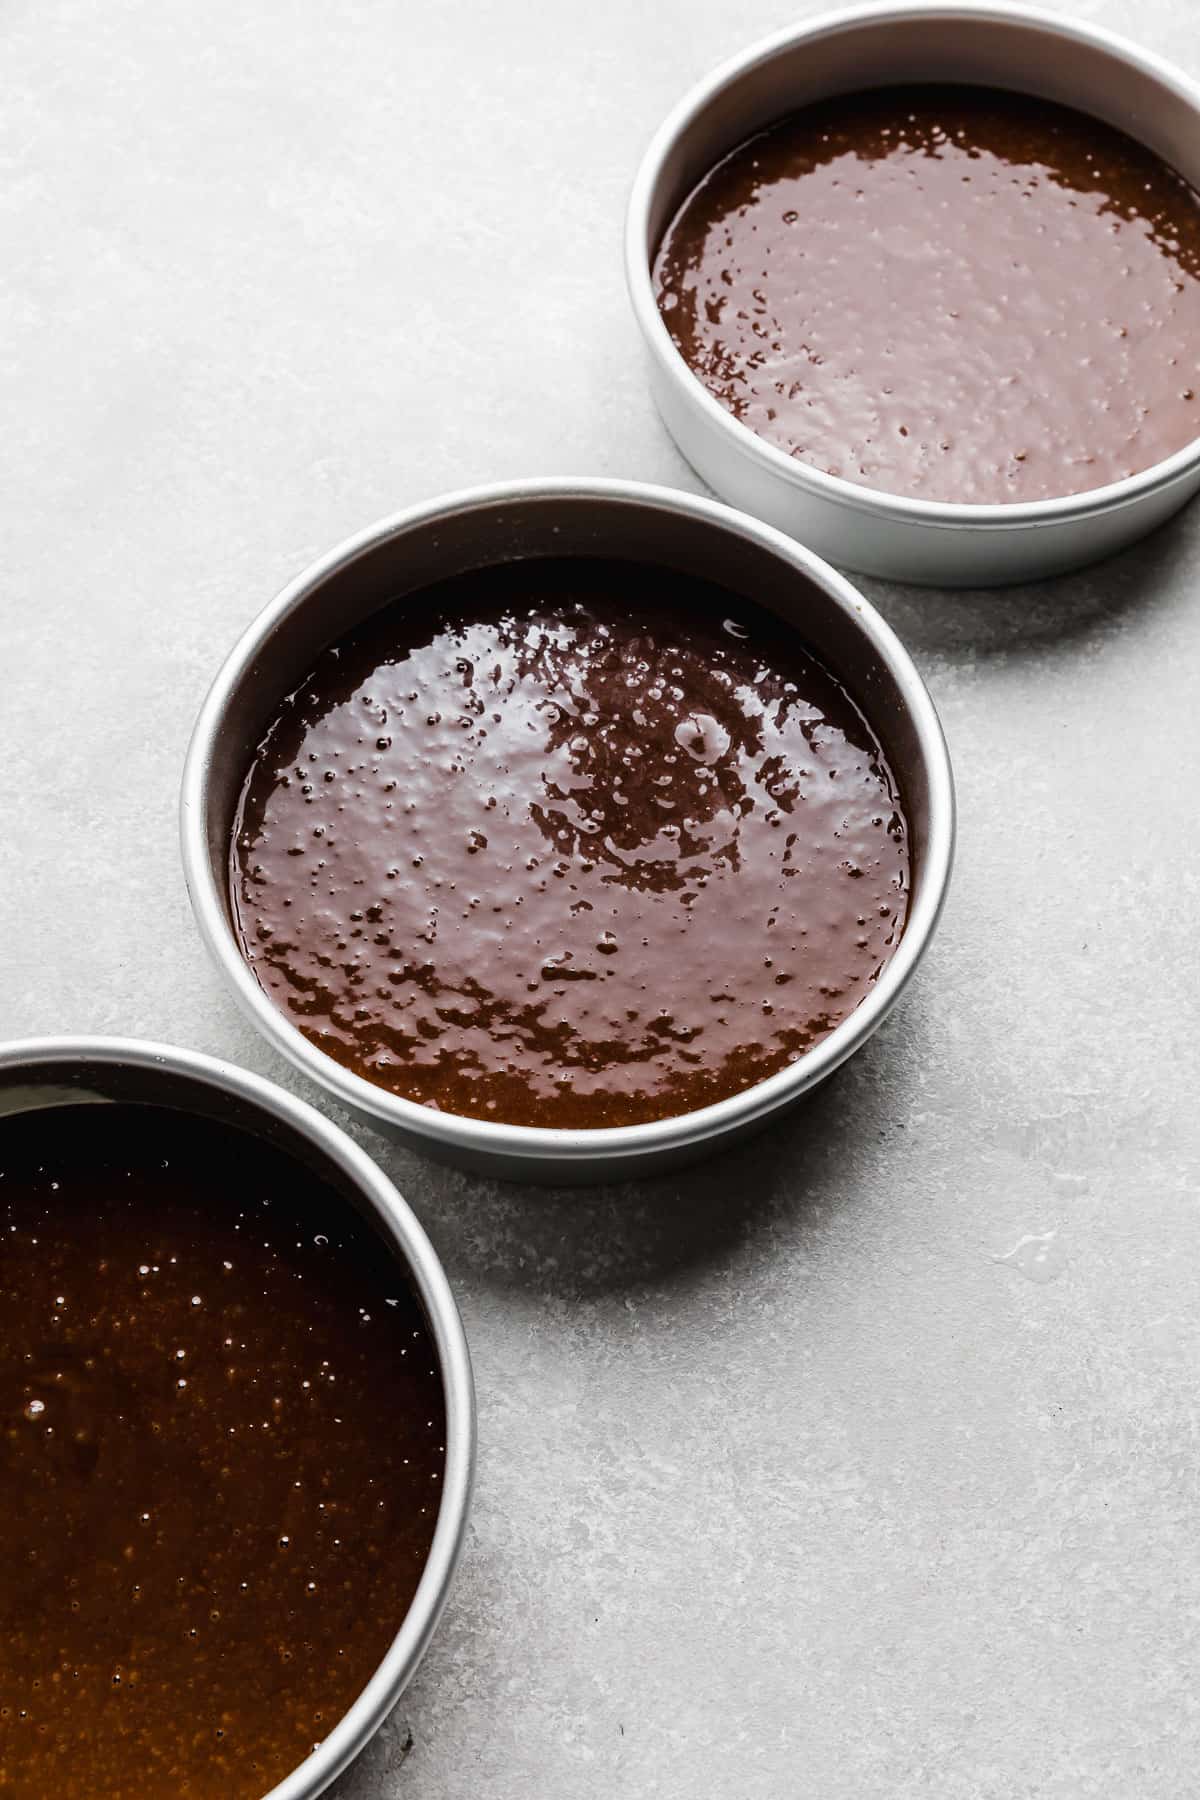 Three round cake pans filled with dark chocolate cake batter made with oil.